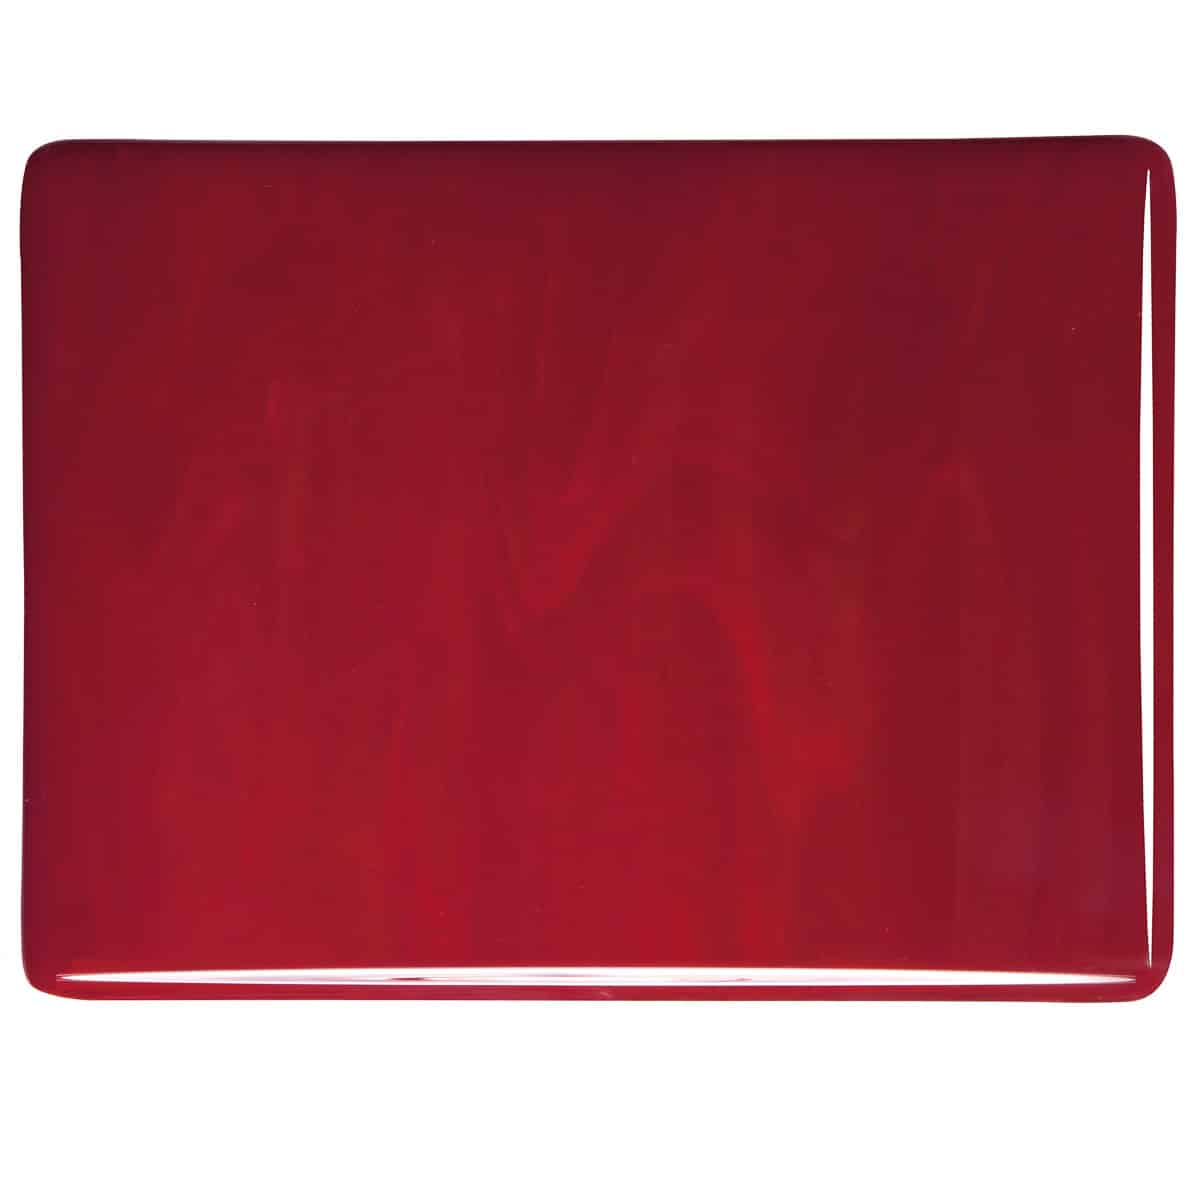 000224 Deep Red Opalescent